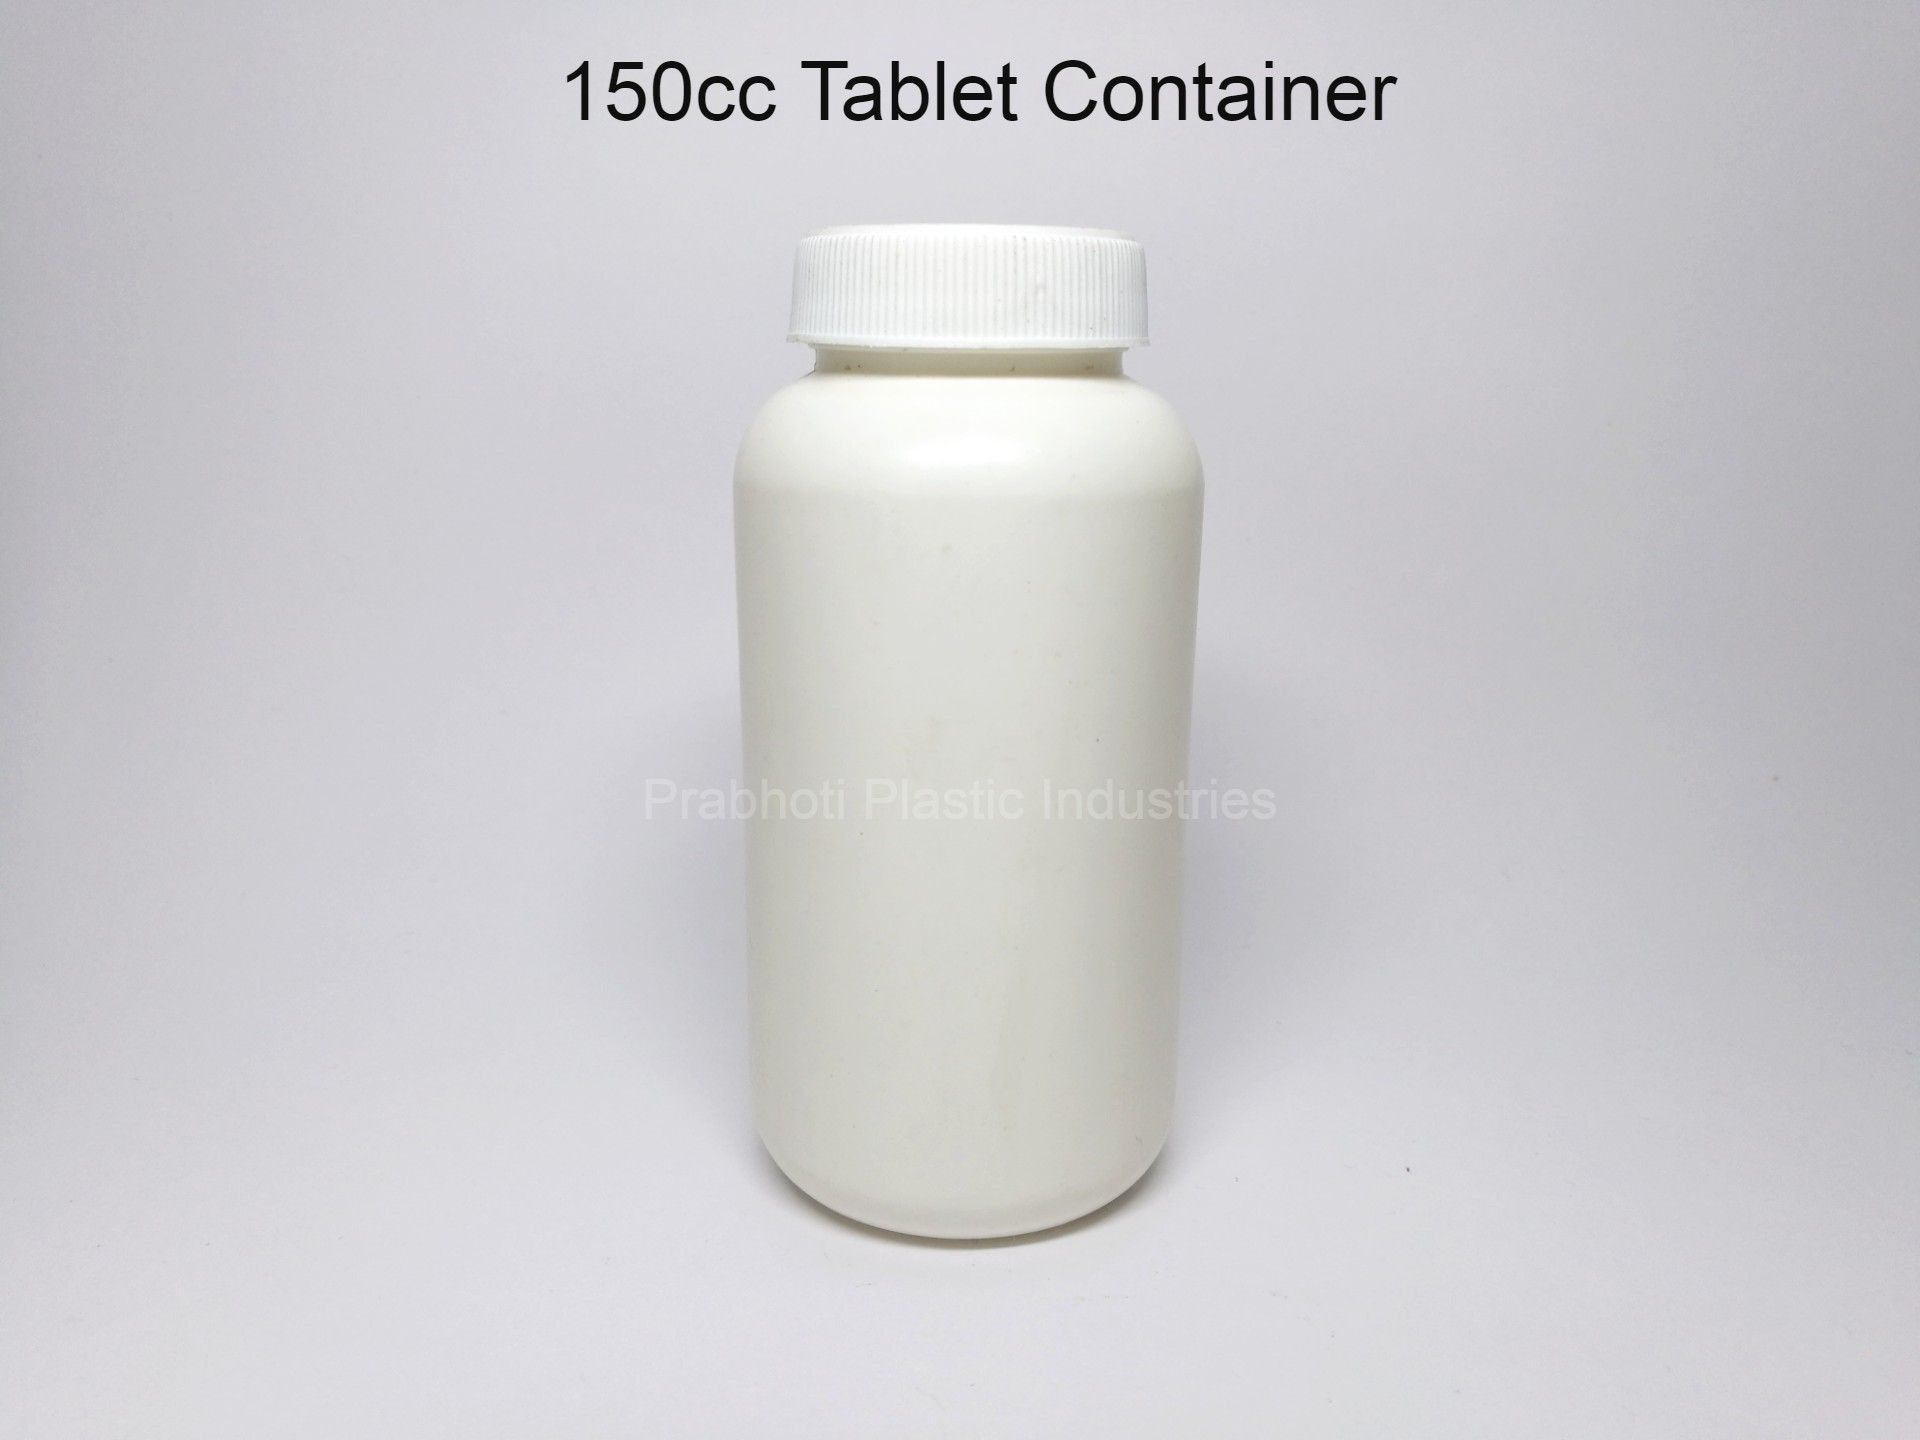 Pharmaceutical HDPE Tablet Container